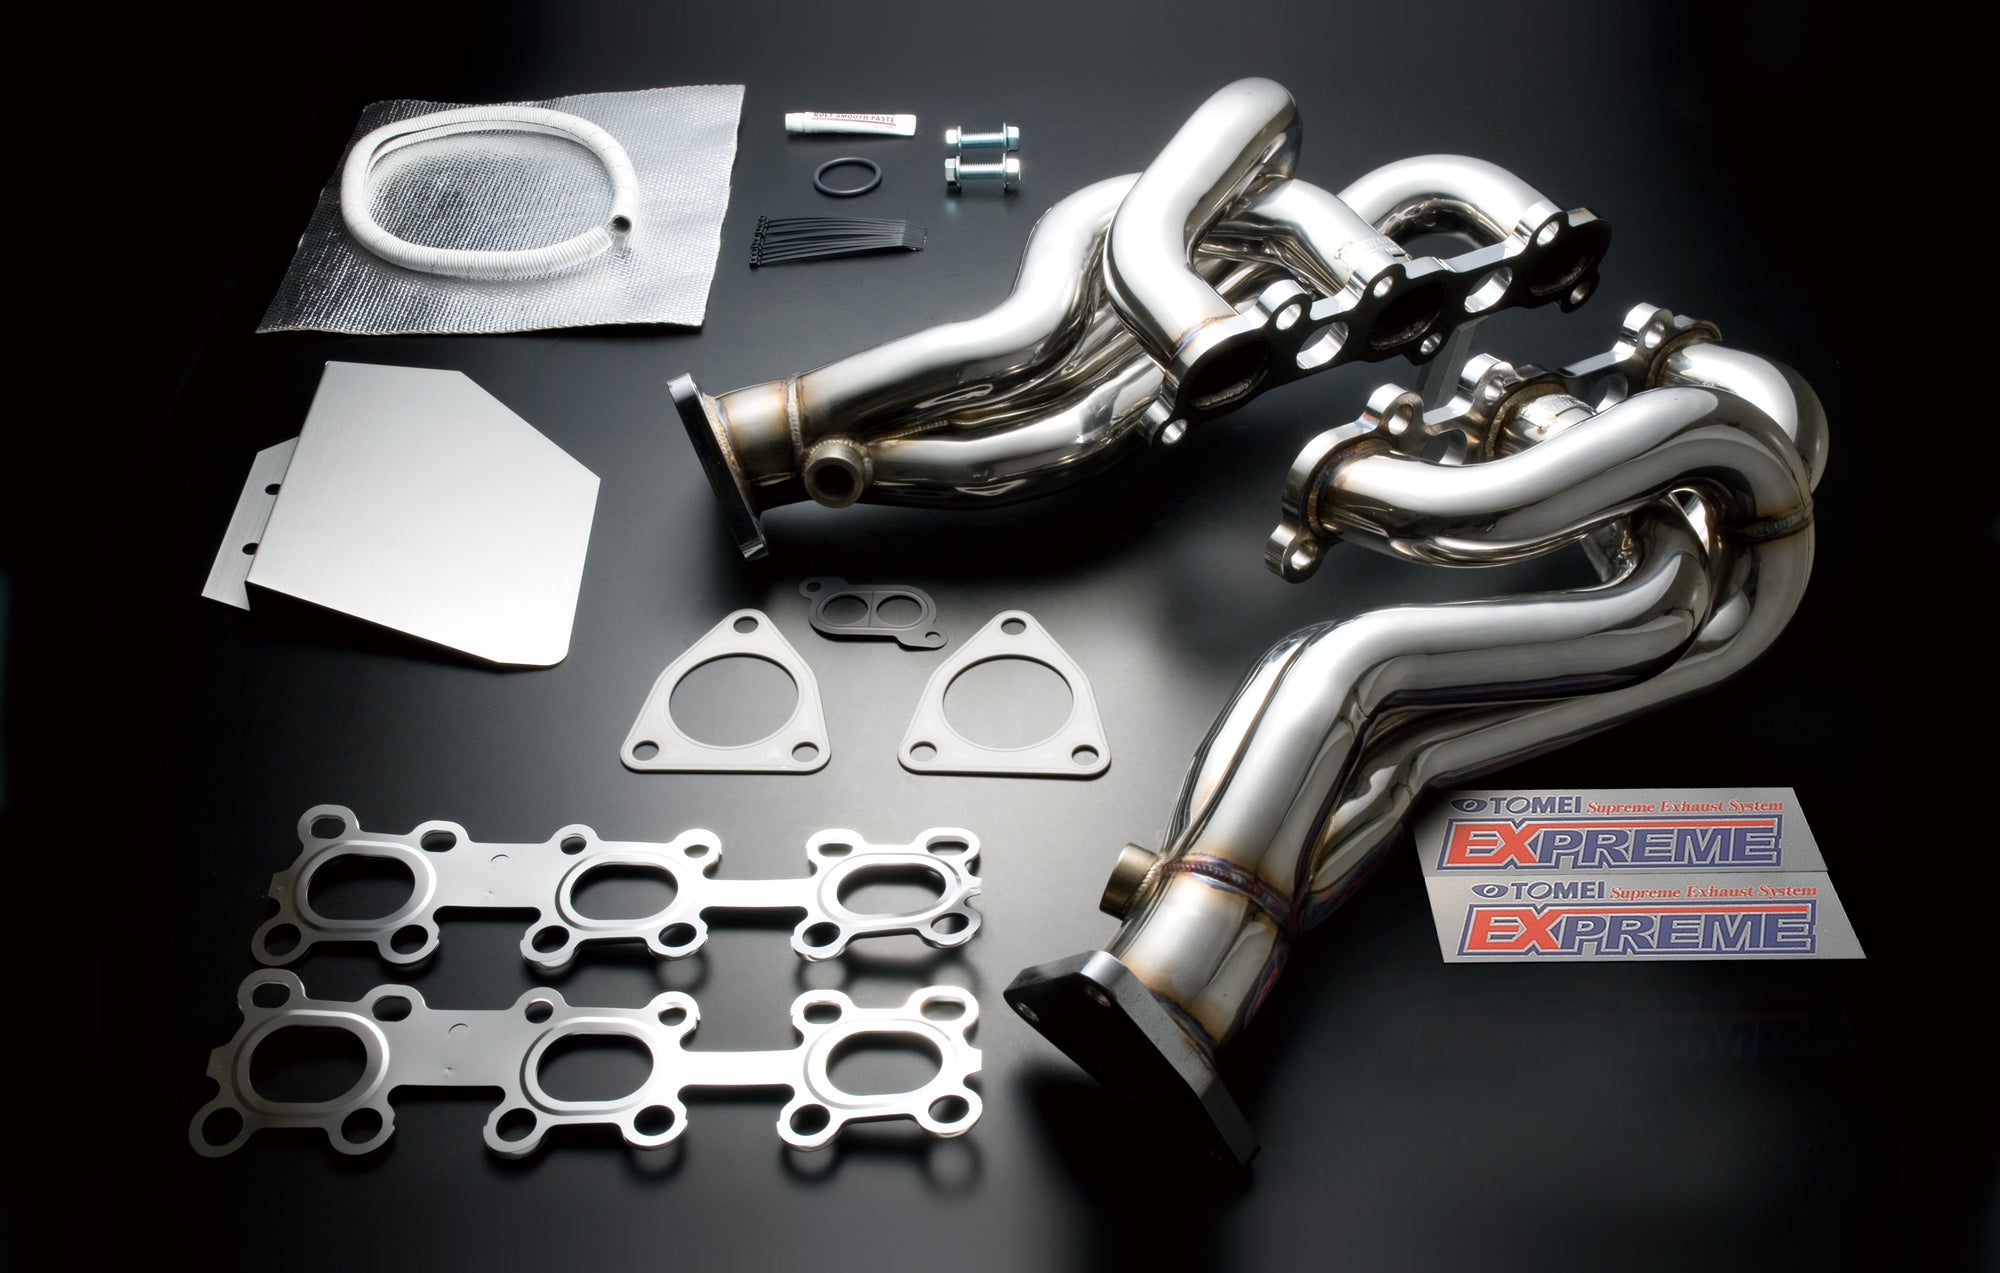 TOMEI EXPREME EXHAUST MANIFOLD  For FAIRLADY Z Z33 CPV35 VQ 415001